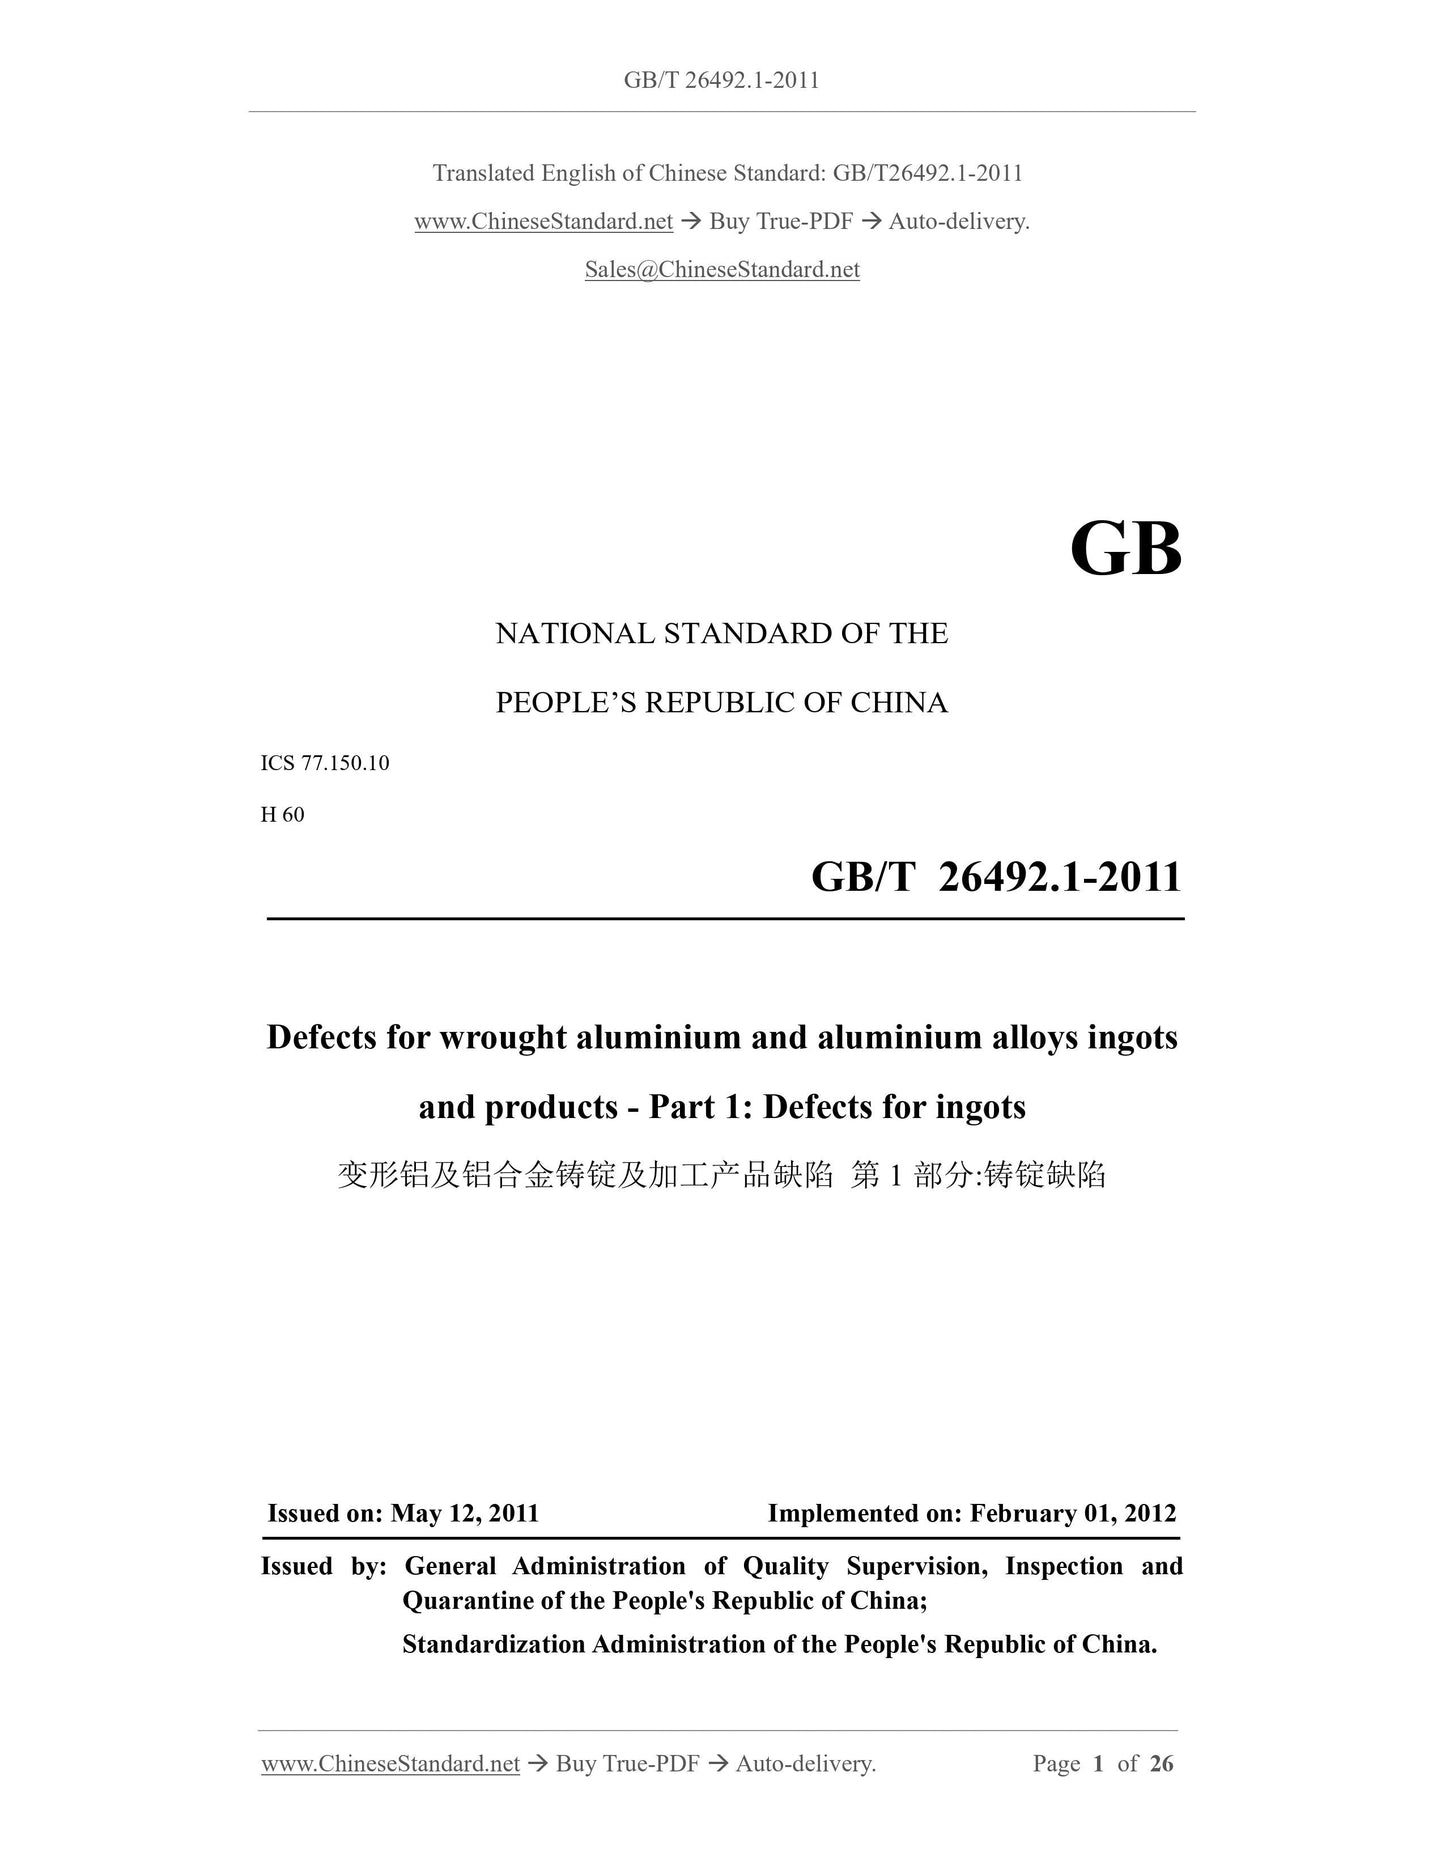 GB/T 26492.1-2011 Page 1